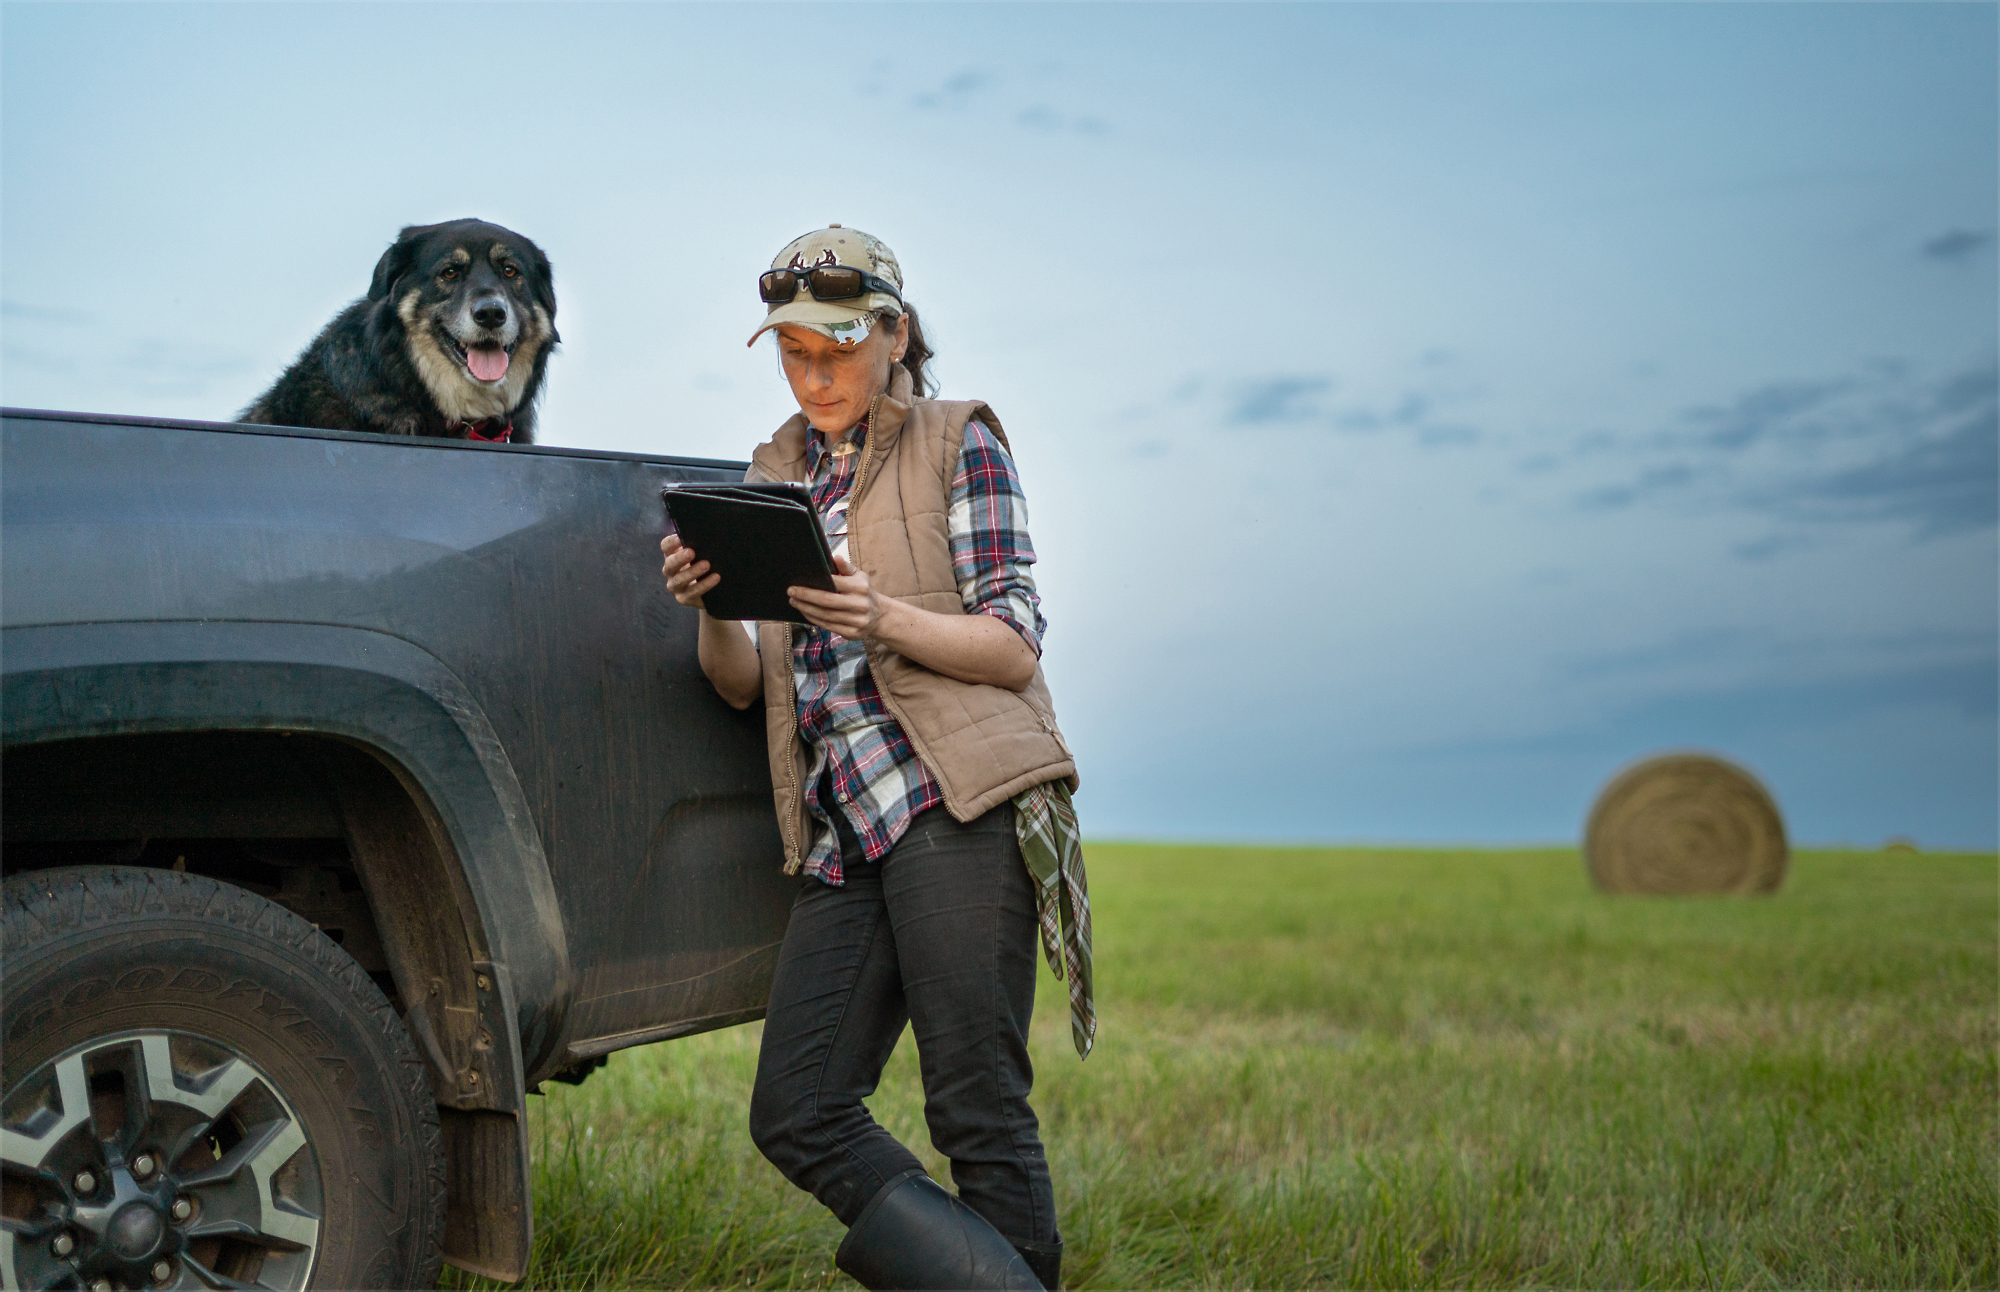 A person in outdoor attire leans against a truck, holding a tablet, with a dog sitting on the back of the truck.